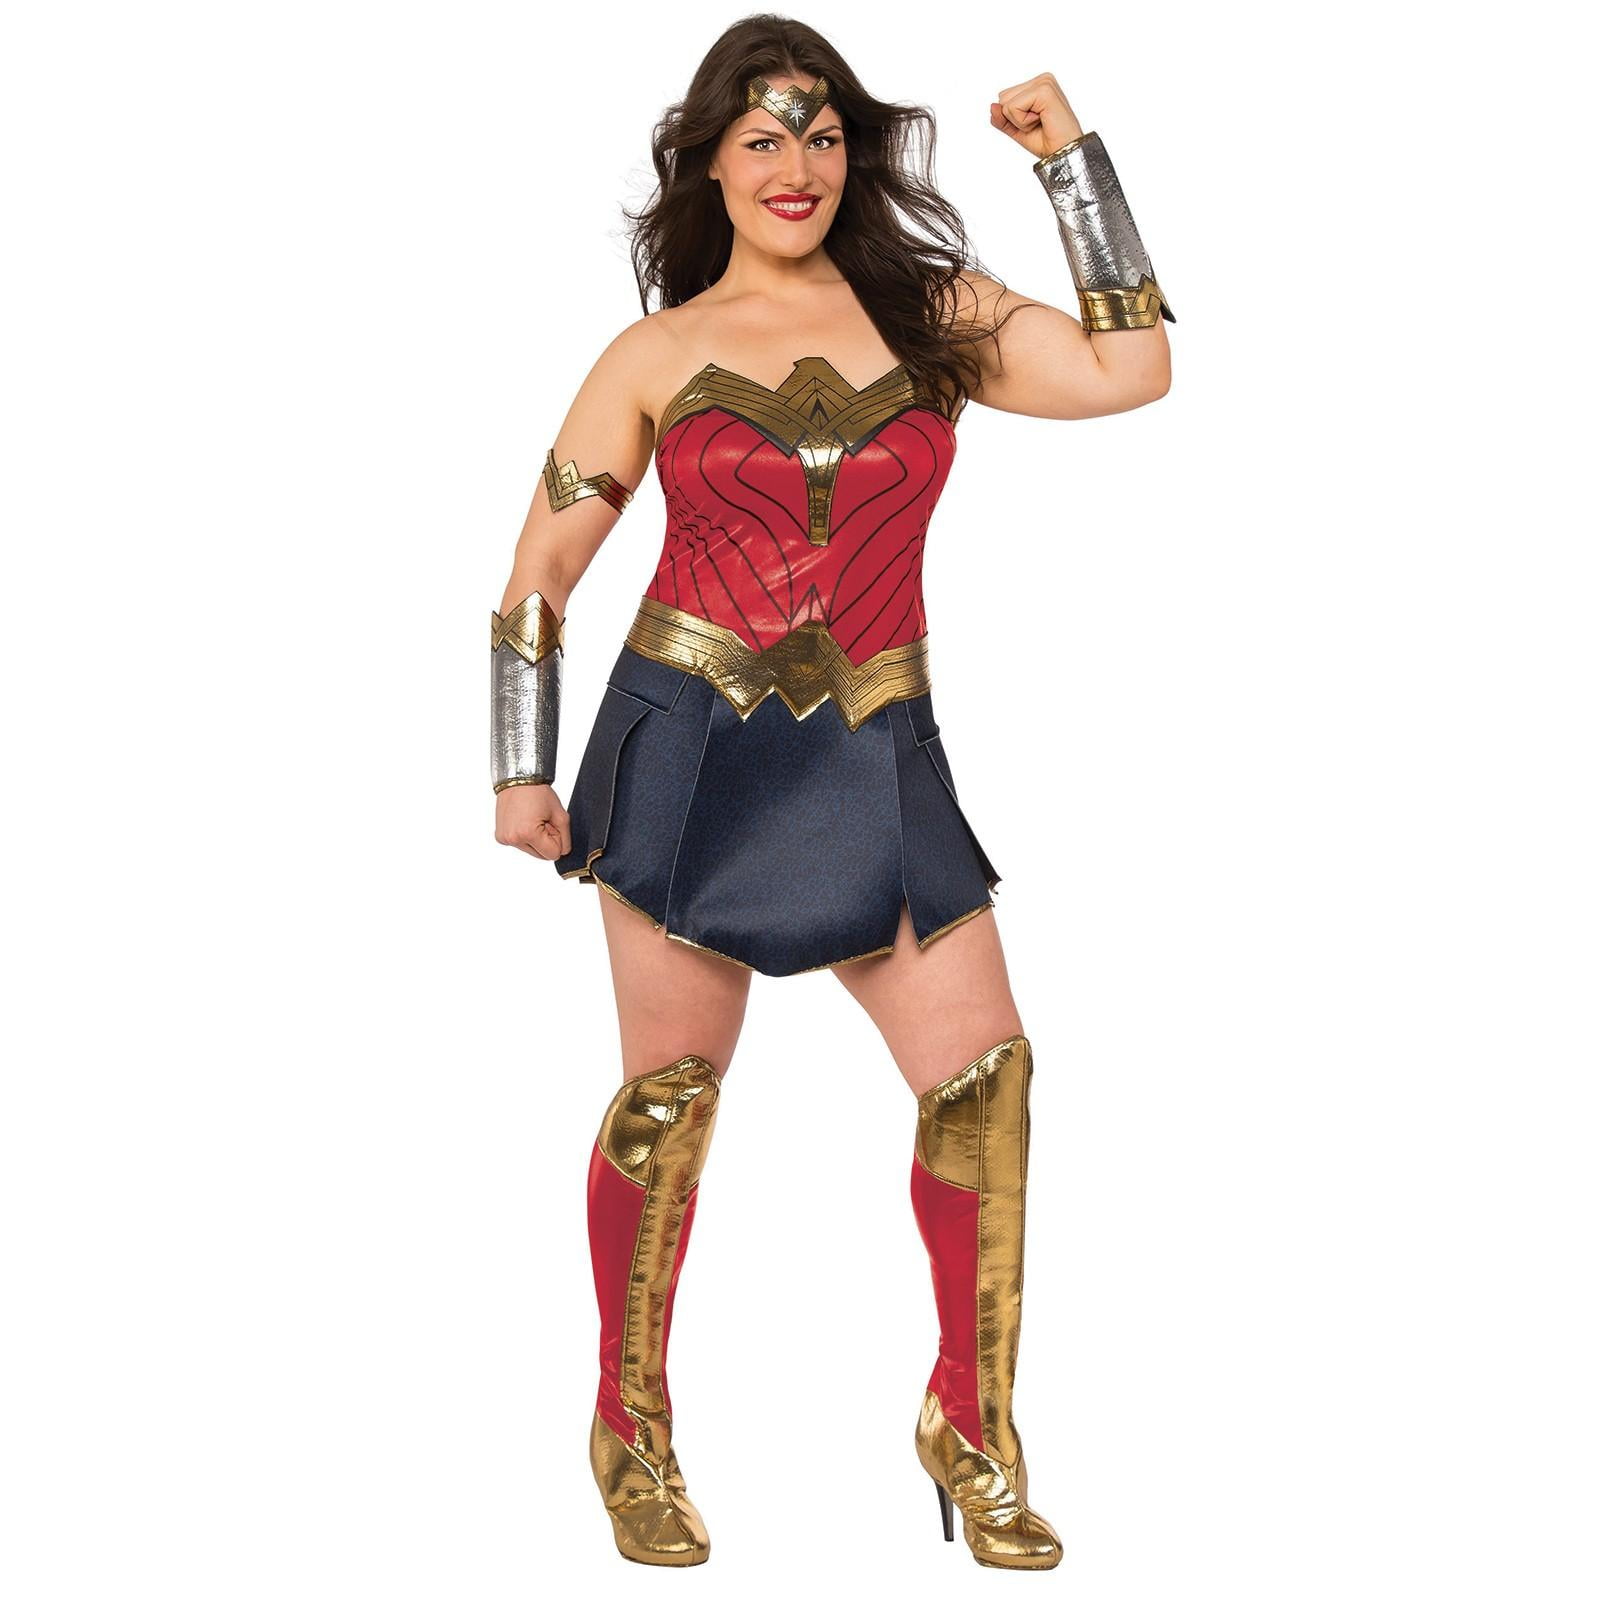 Rubies Justice League Wonder Woman Adults Costume Small 